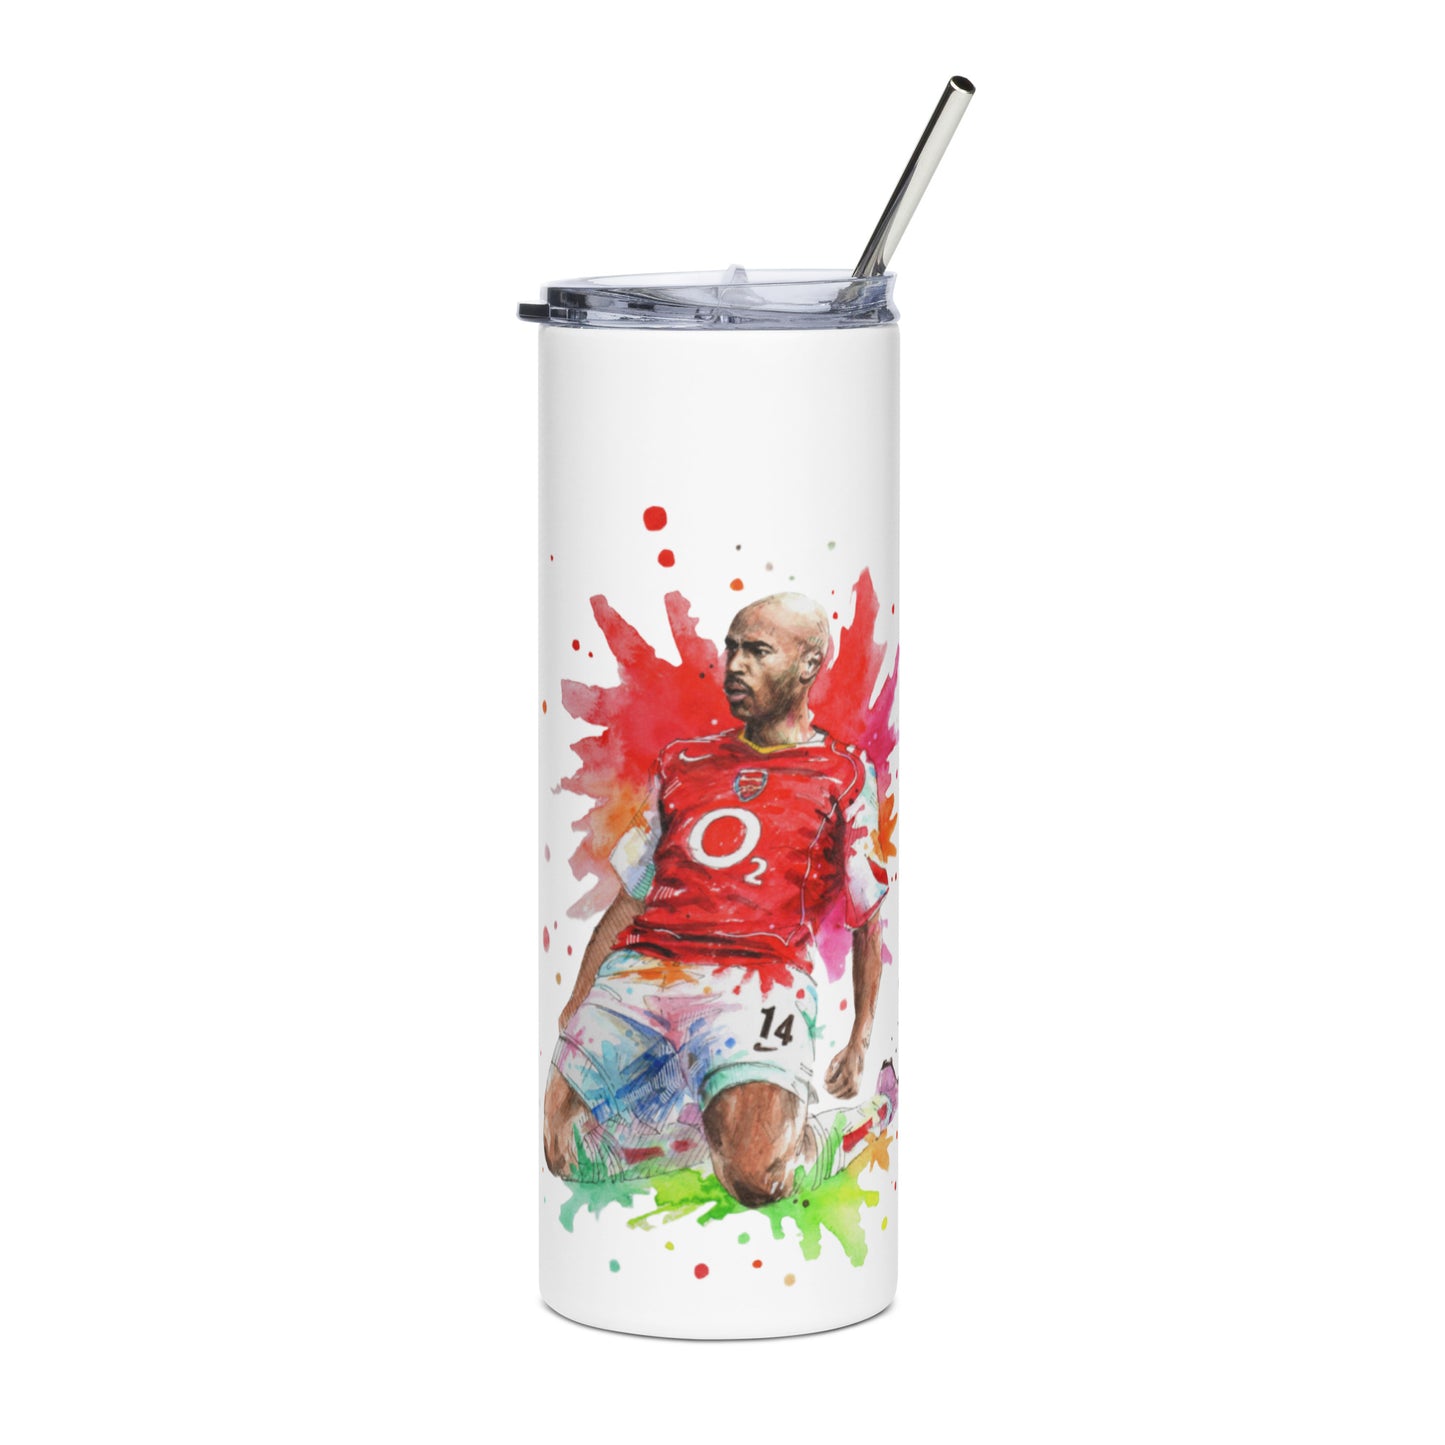 Arsenal Thierry Henry Vintage Stainless steel tumbler - The 90+ Minute